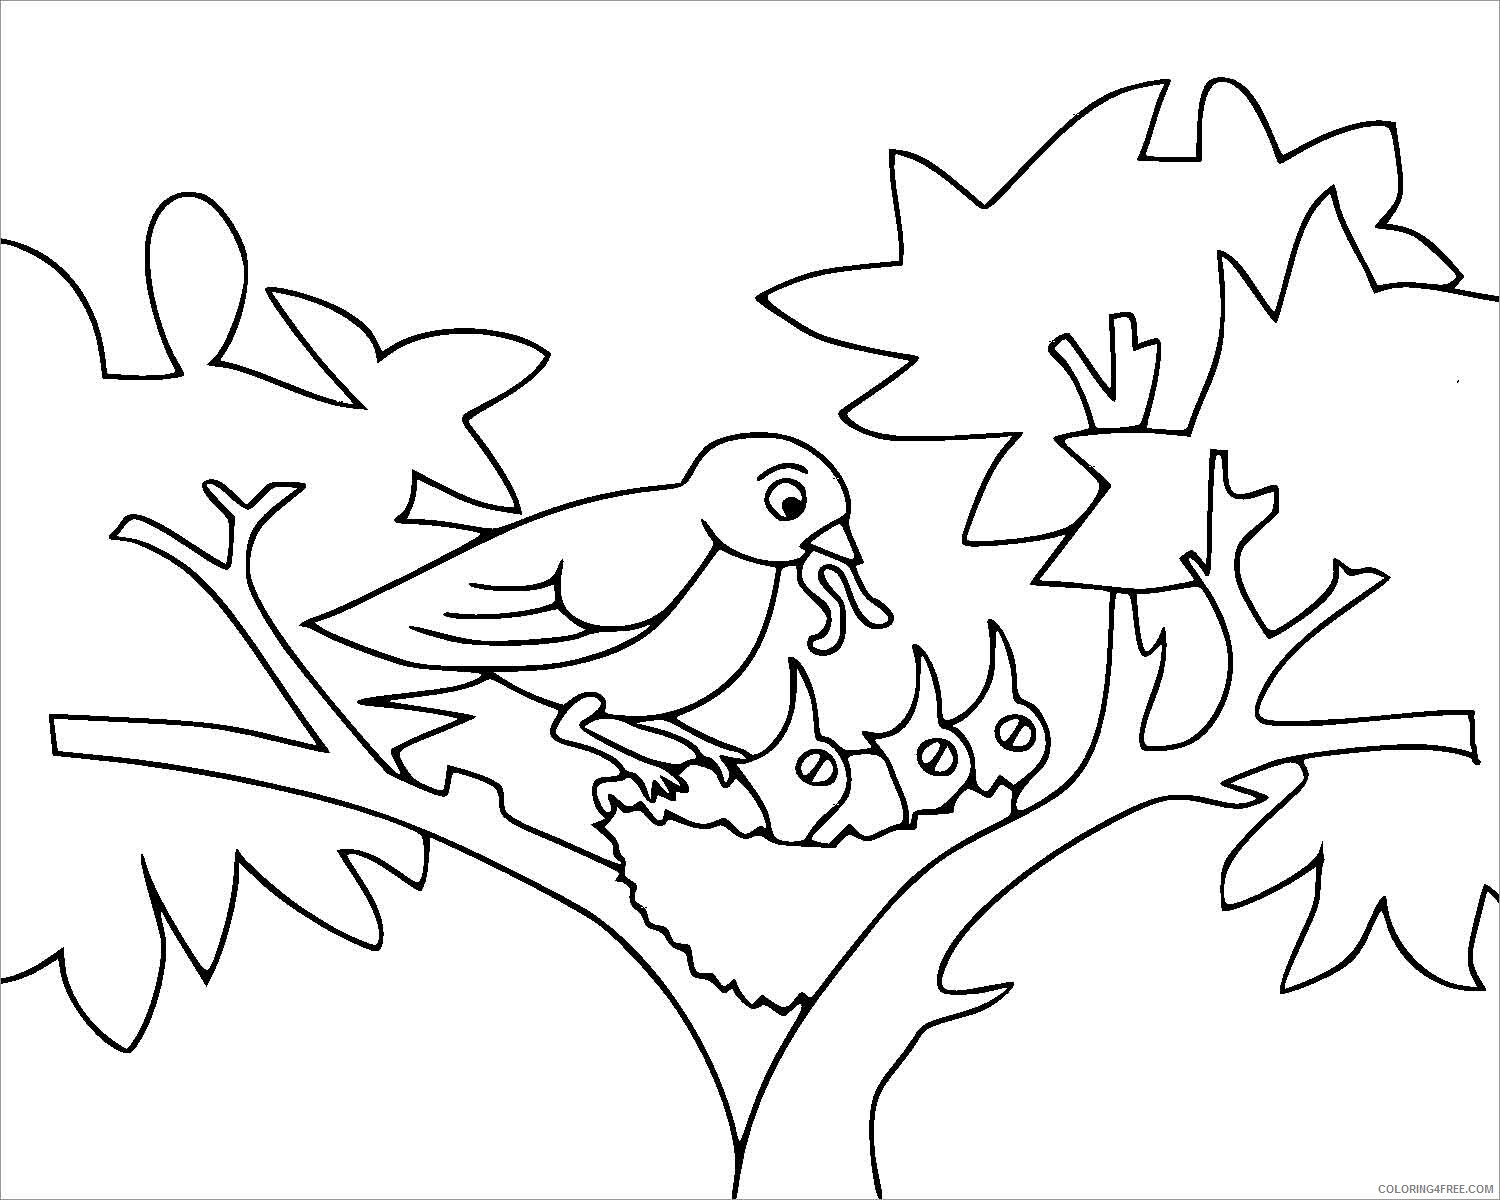 Printable Tree Coloring Pages Tree Nature bird moms and baby lives on tree 2021 Coloring4free